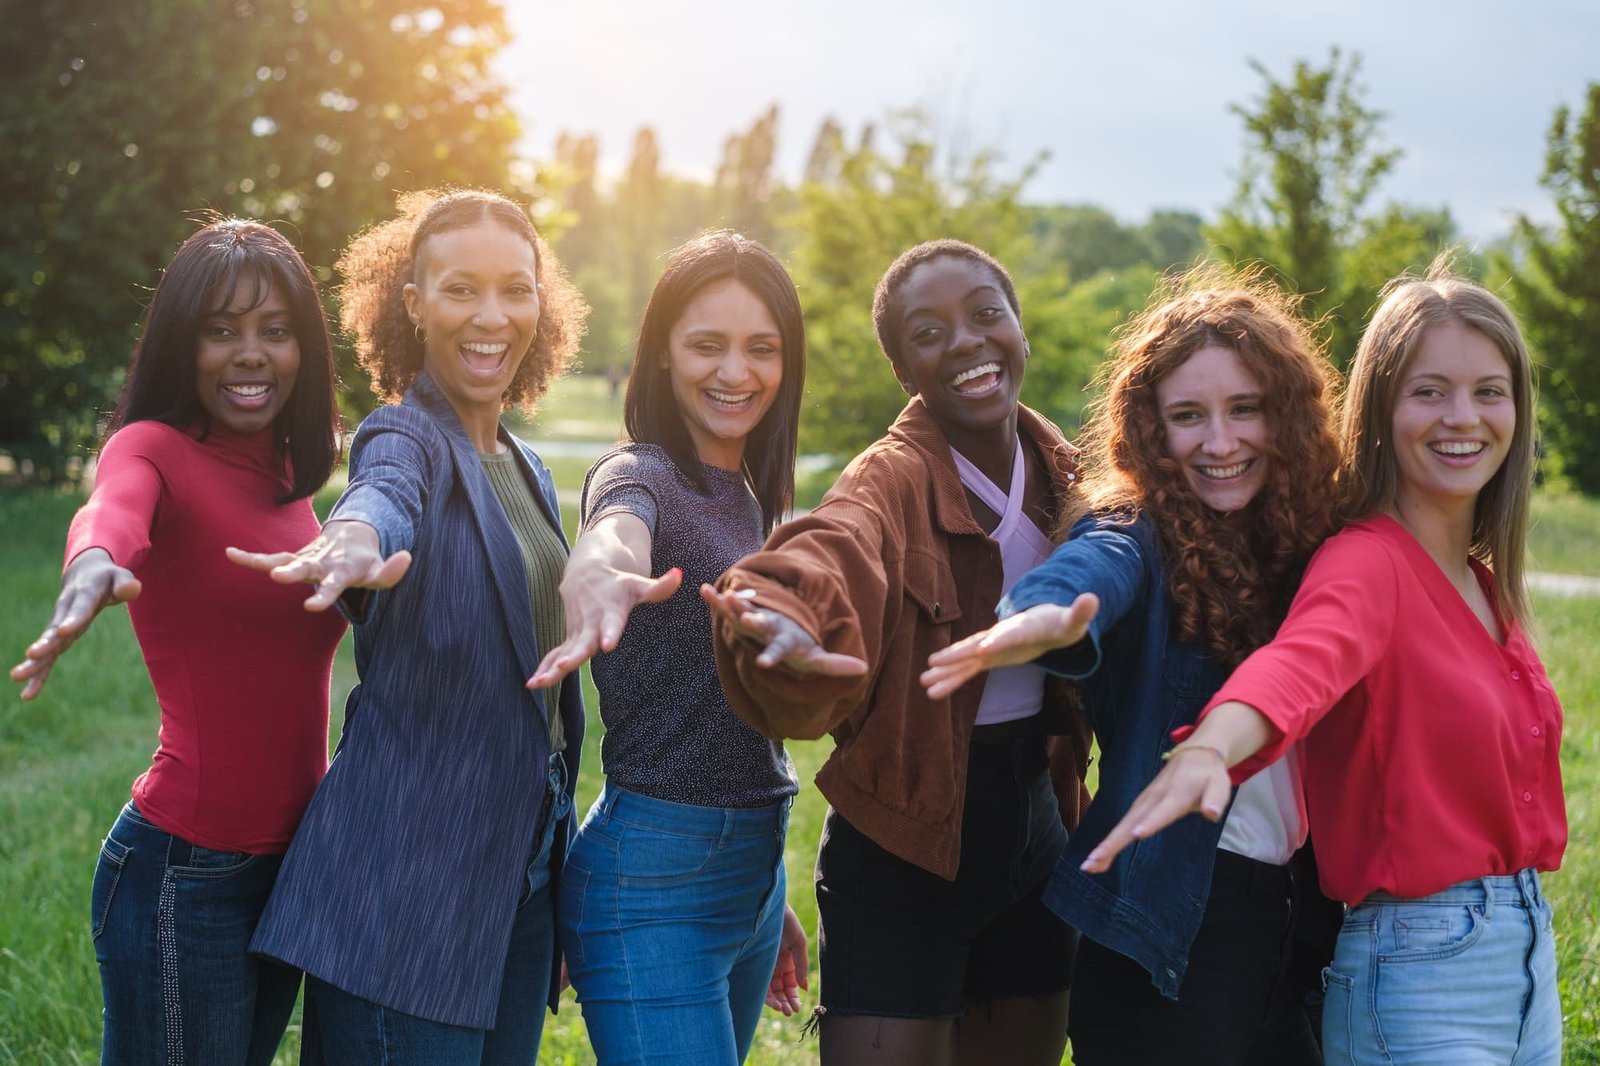 Group of empowered women celebrating together at sunset outdoors in the park